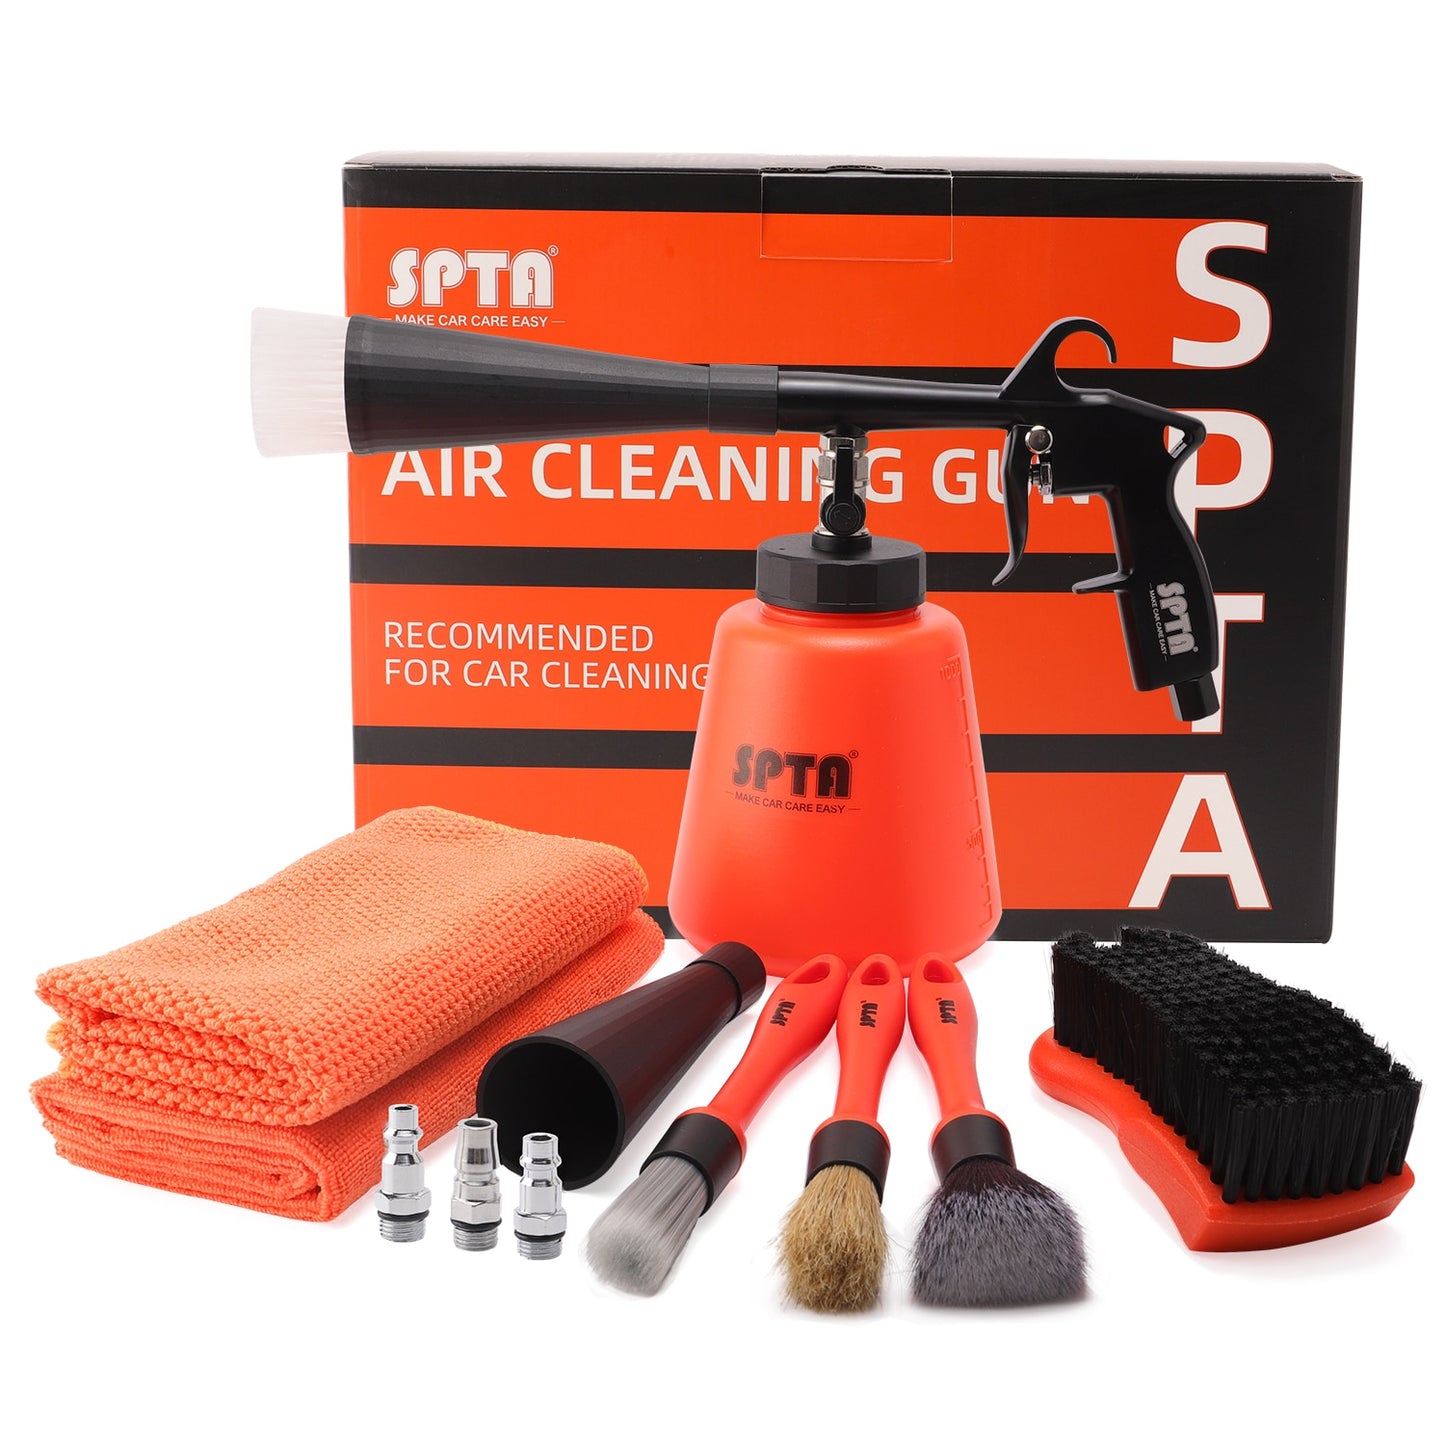 SPTA High-Pressure Car Washer Dry Cleaning Gun Bundle - Tornado Cleaning Tool with Microfiber Towels and Detailing Brushes